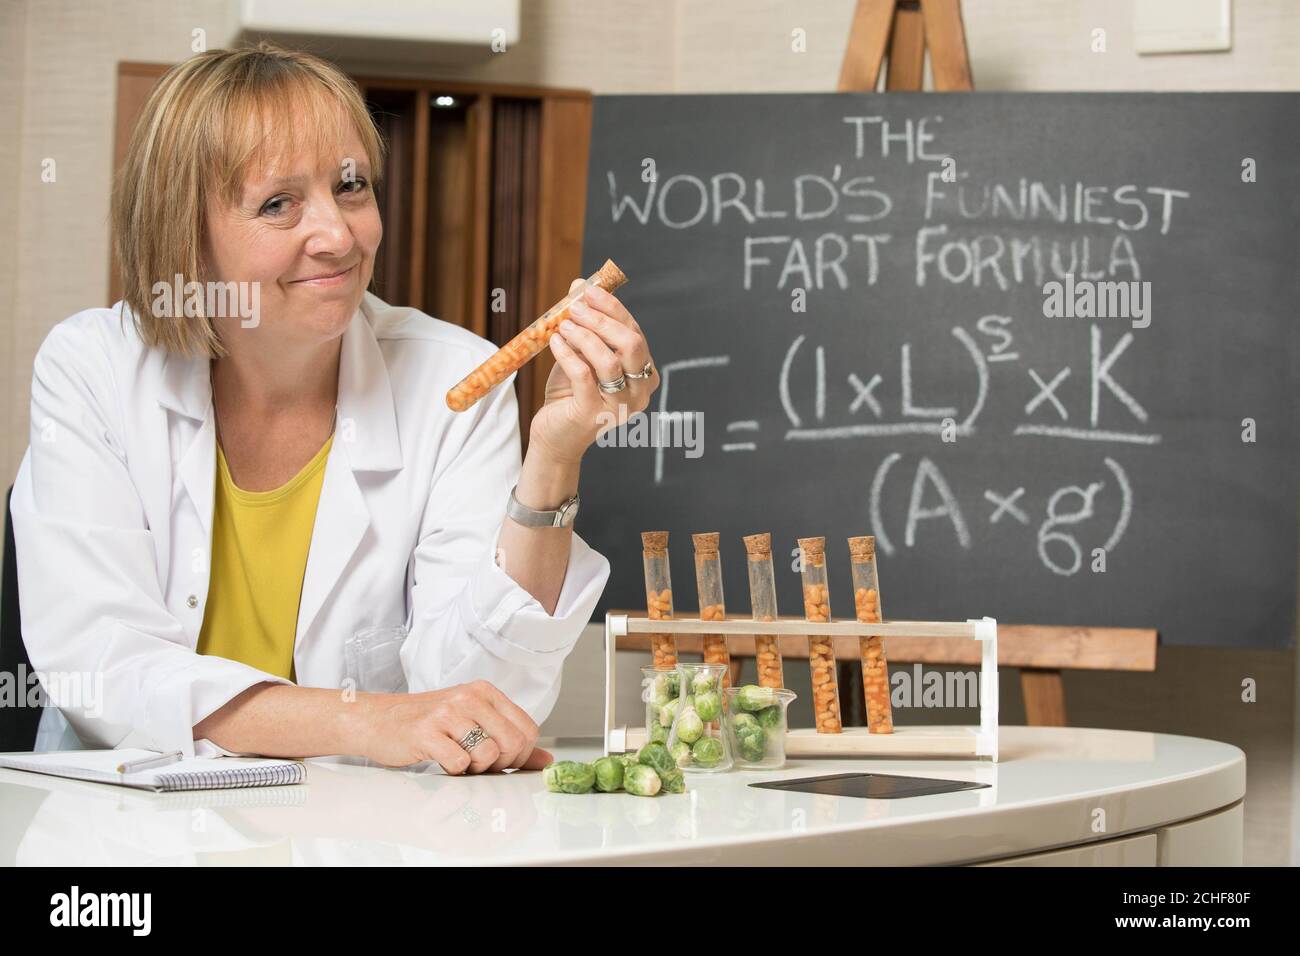 Scientist Dr Helen Pilcher reveals the mathematical formula for the world's funniest fart according to science, which has been discovered for a new study titled the 'Flatulence Report' commissioned by Beano. Stock Photo